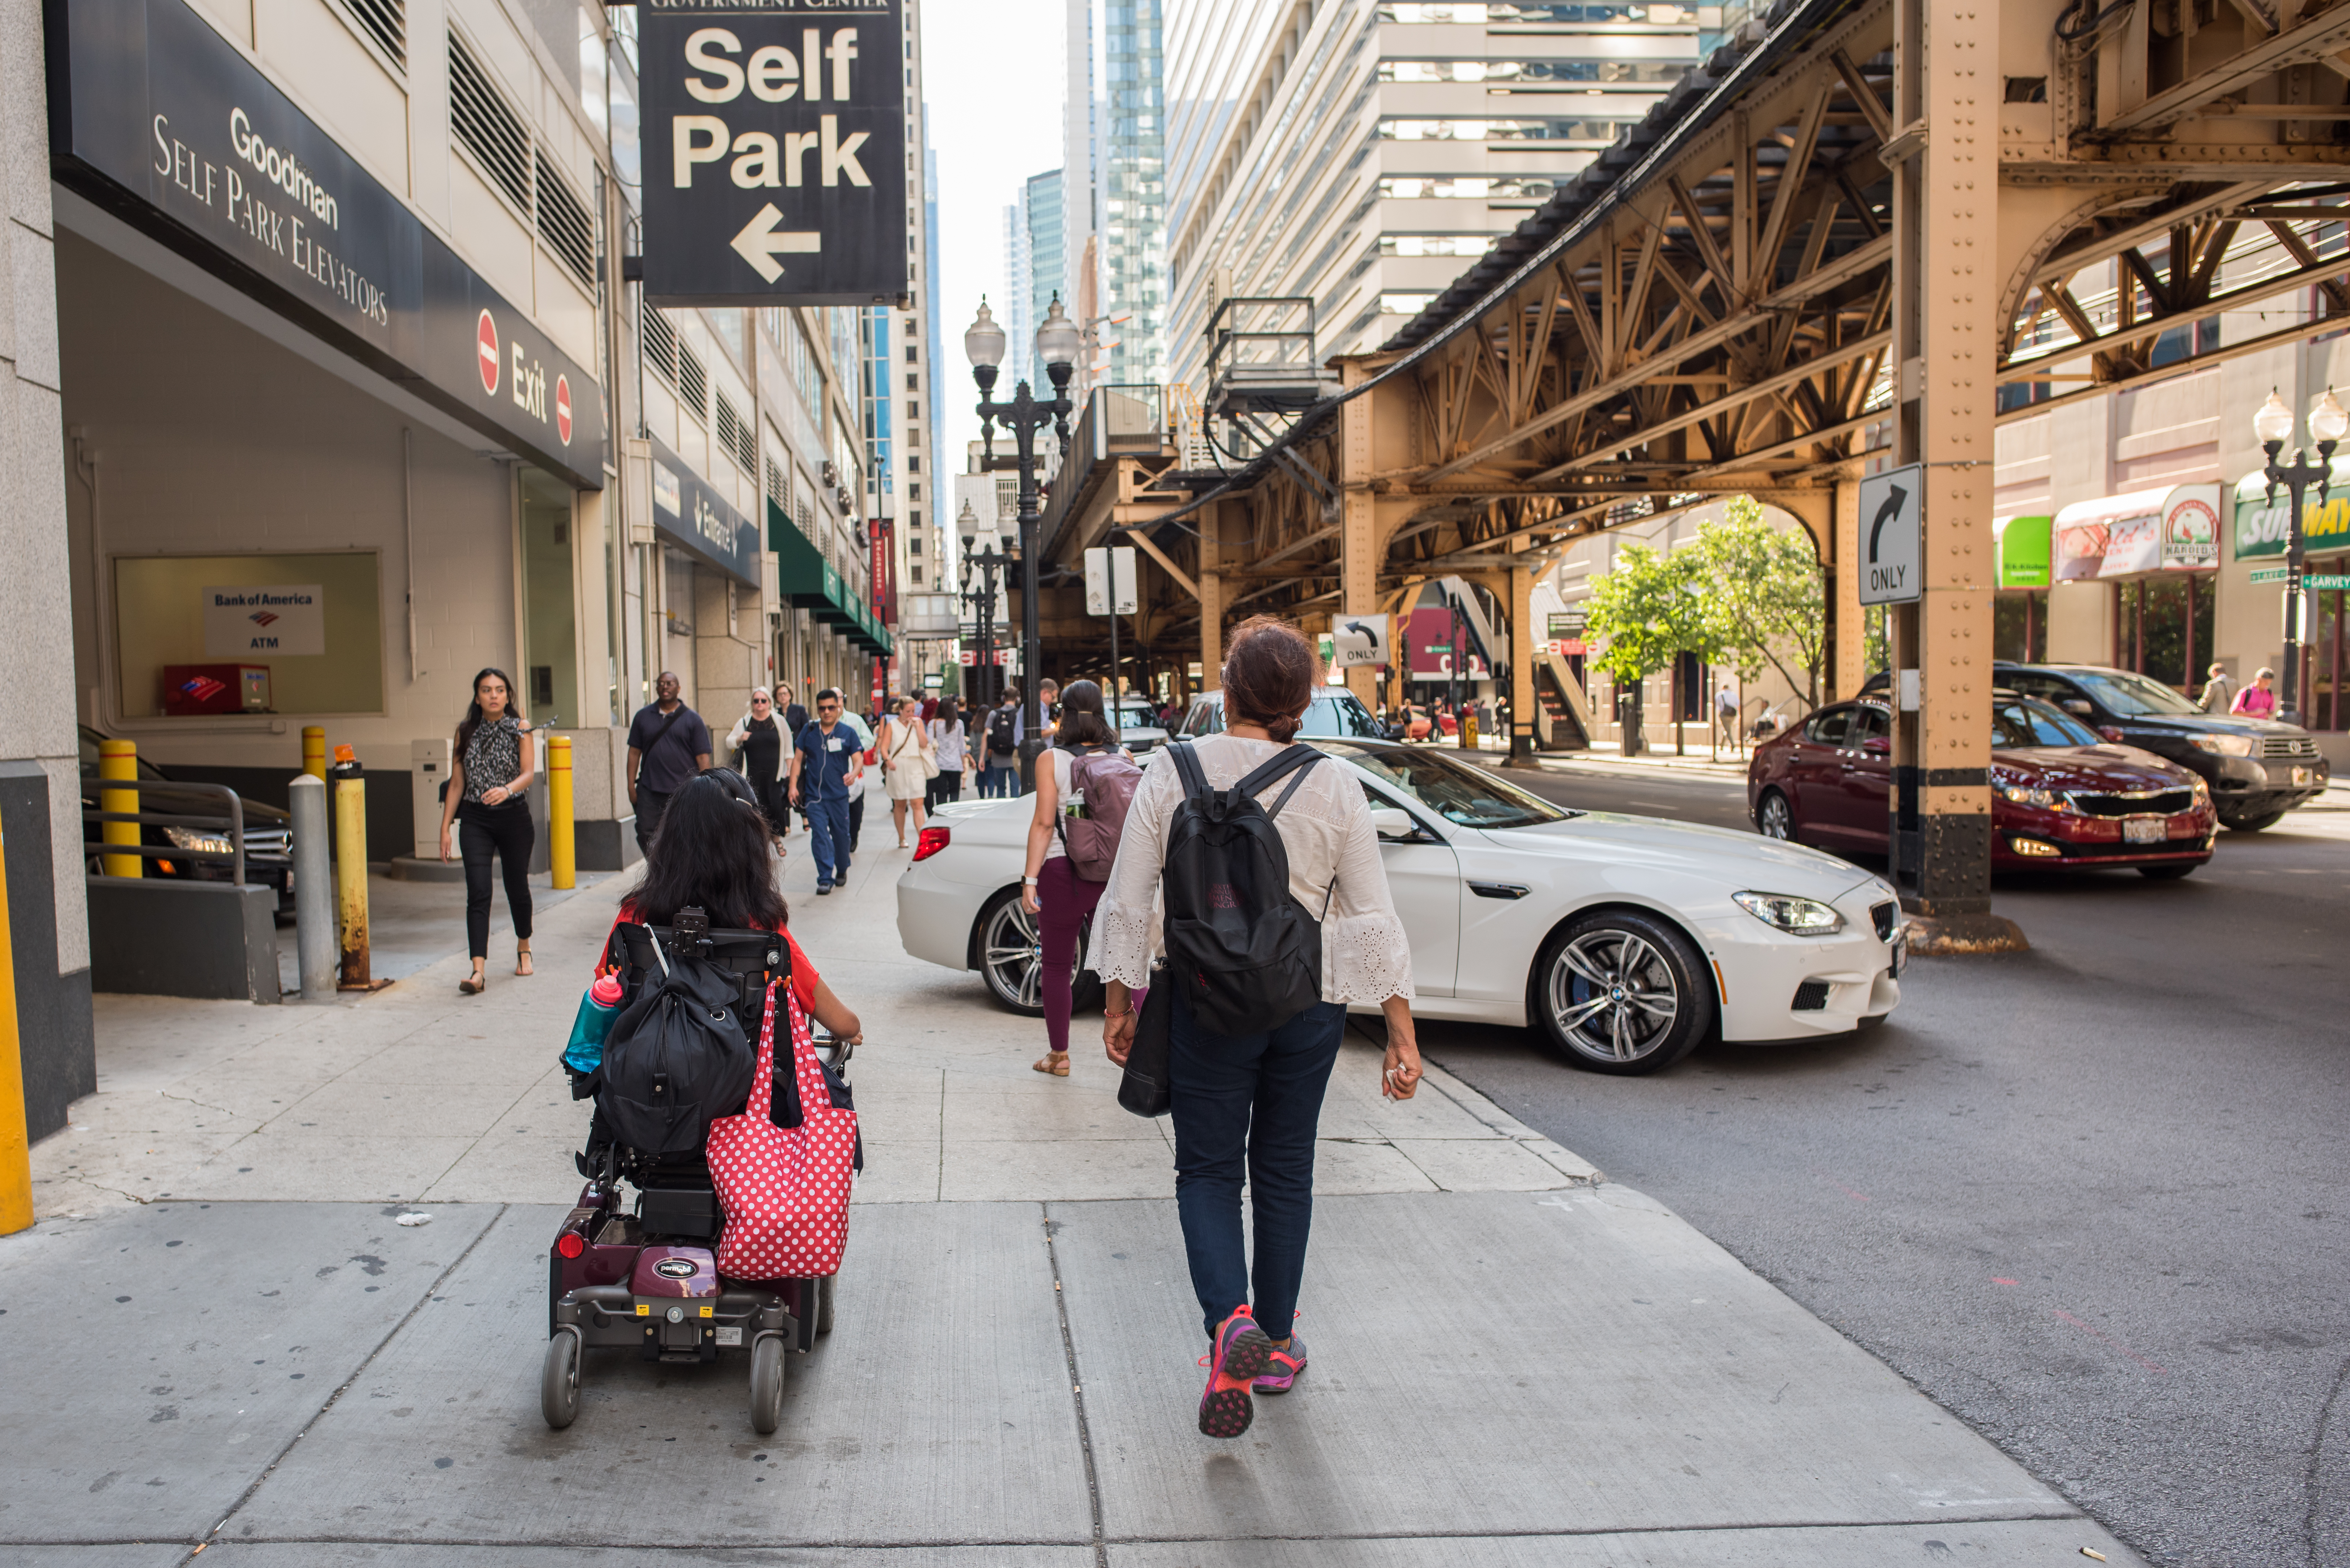 Chicago, IL, August 9, 2017: A woman rides a motorized wheelchair along the sidewalk downtown. Chicago is a very pedestrian friendly city with wide streets and accessible public transit